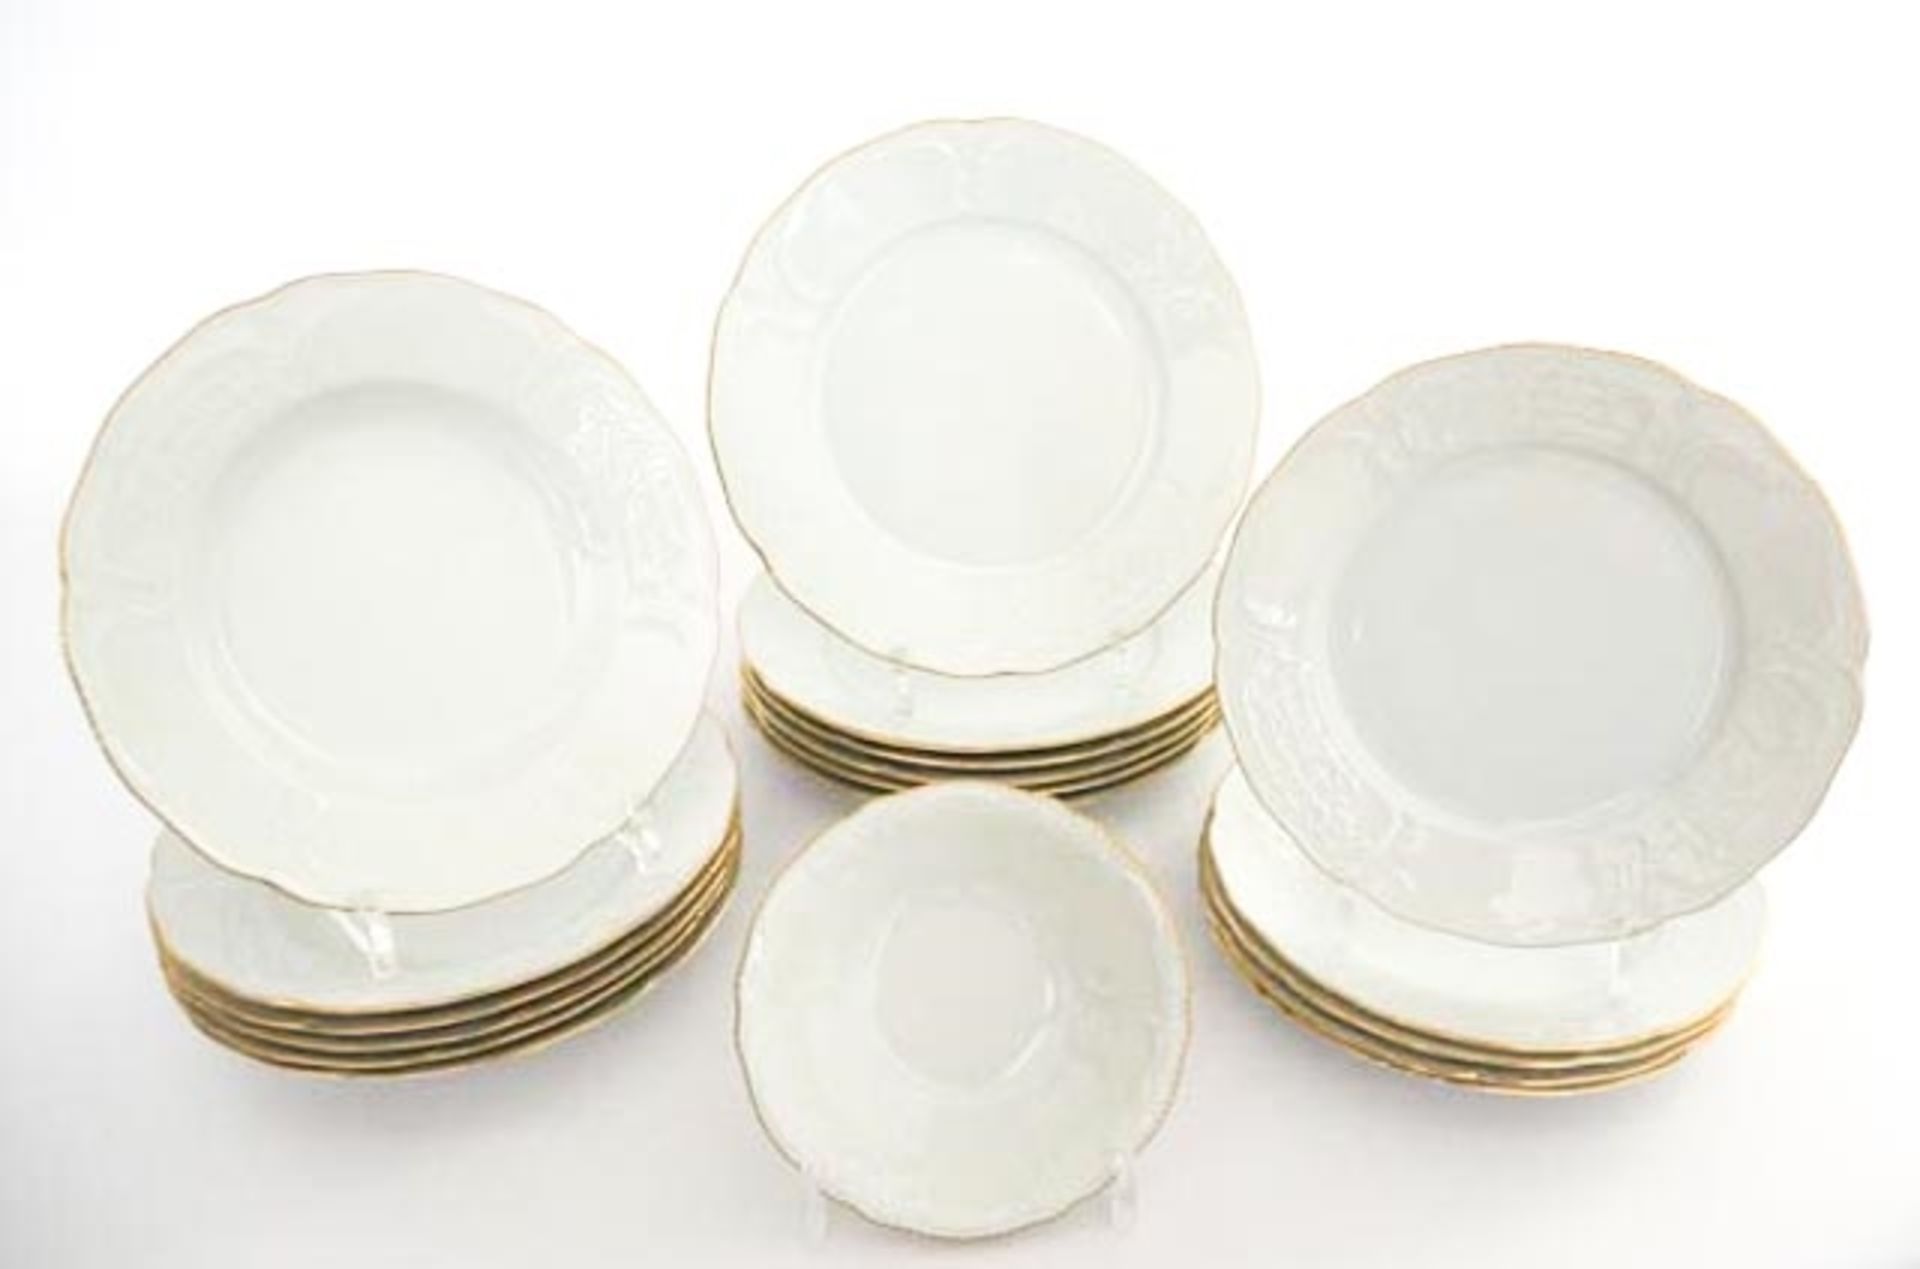 Rosenthal "Classic Rose" Restservice